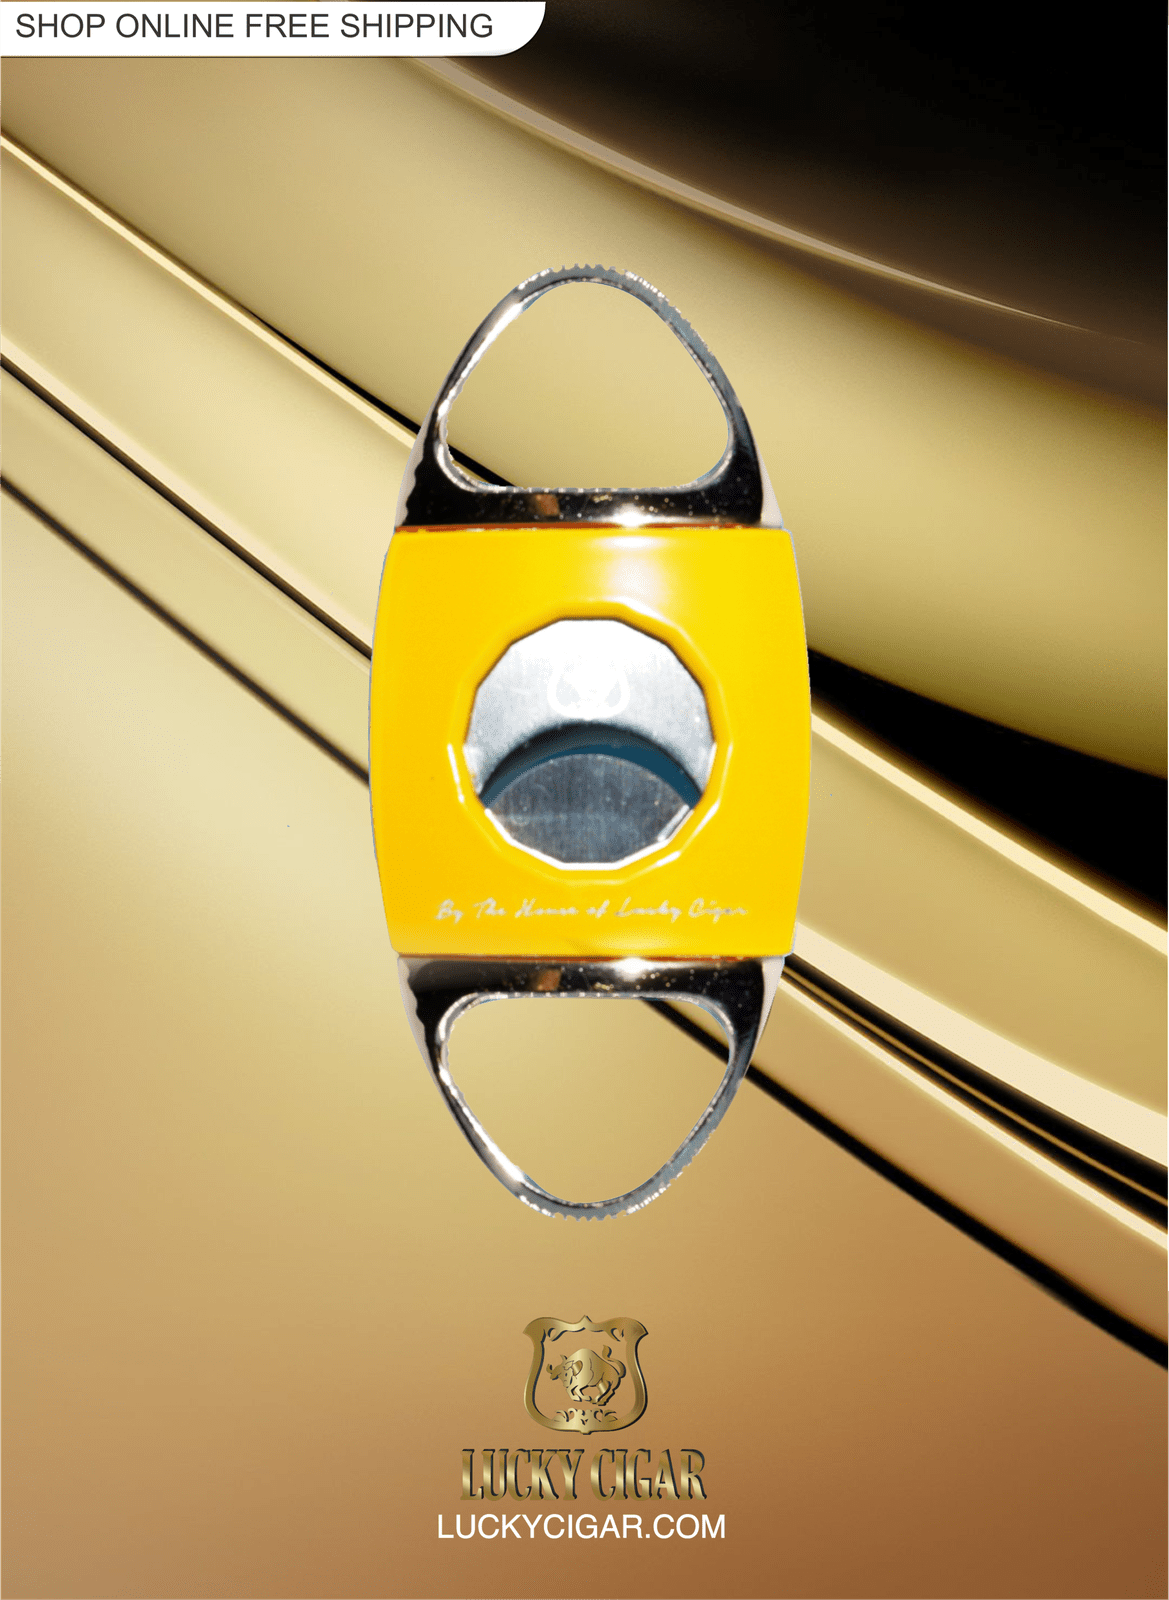 Cigar Lifestyle Accessories: Cigar Cutter in Yellow/Chrome